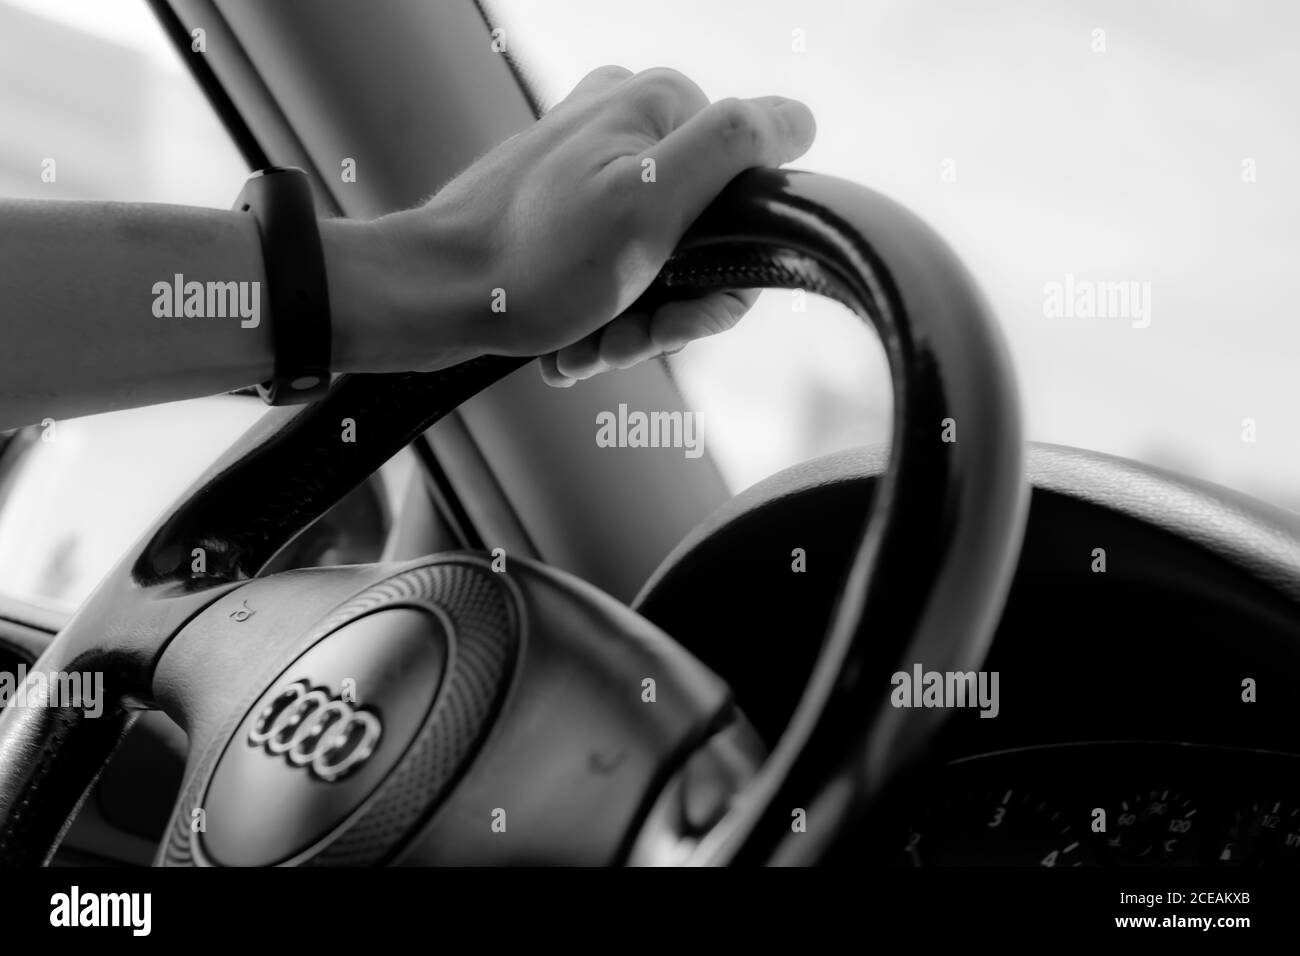 Audi driver with hand on steering wheel black and white photo Stock Photo